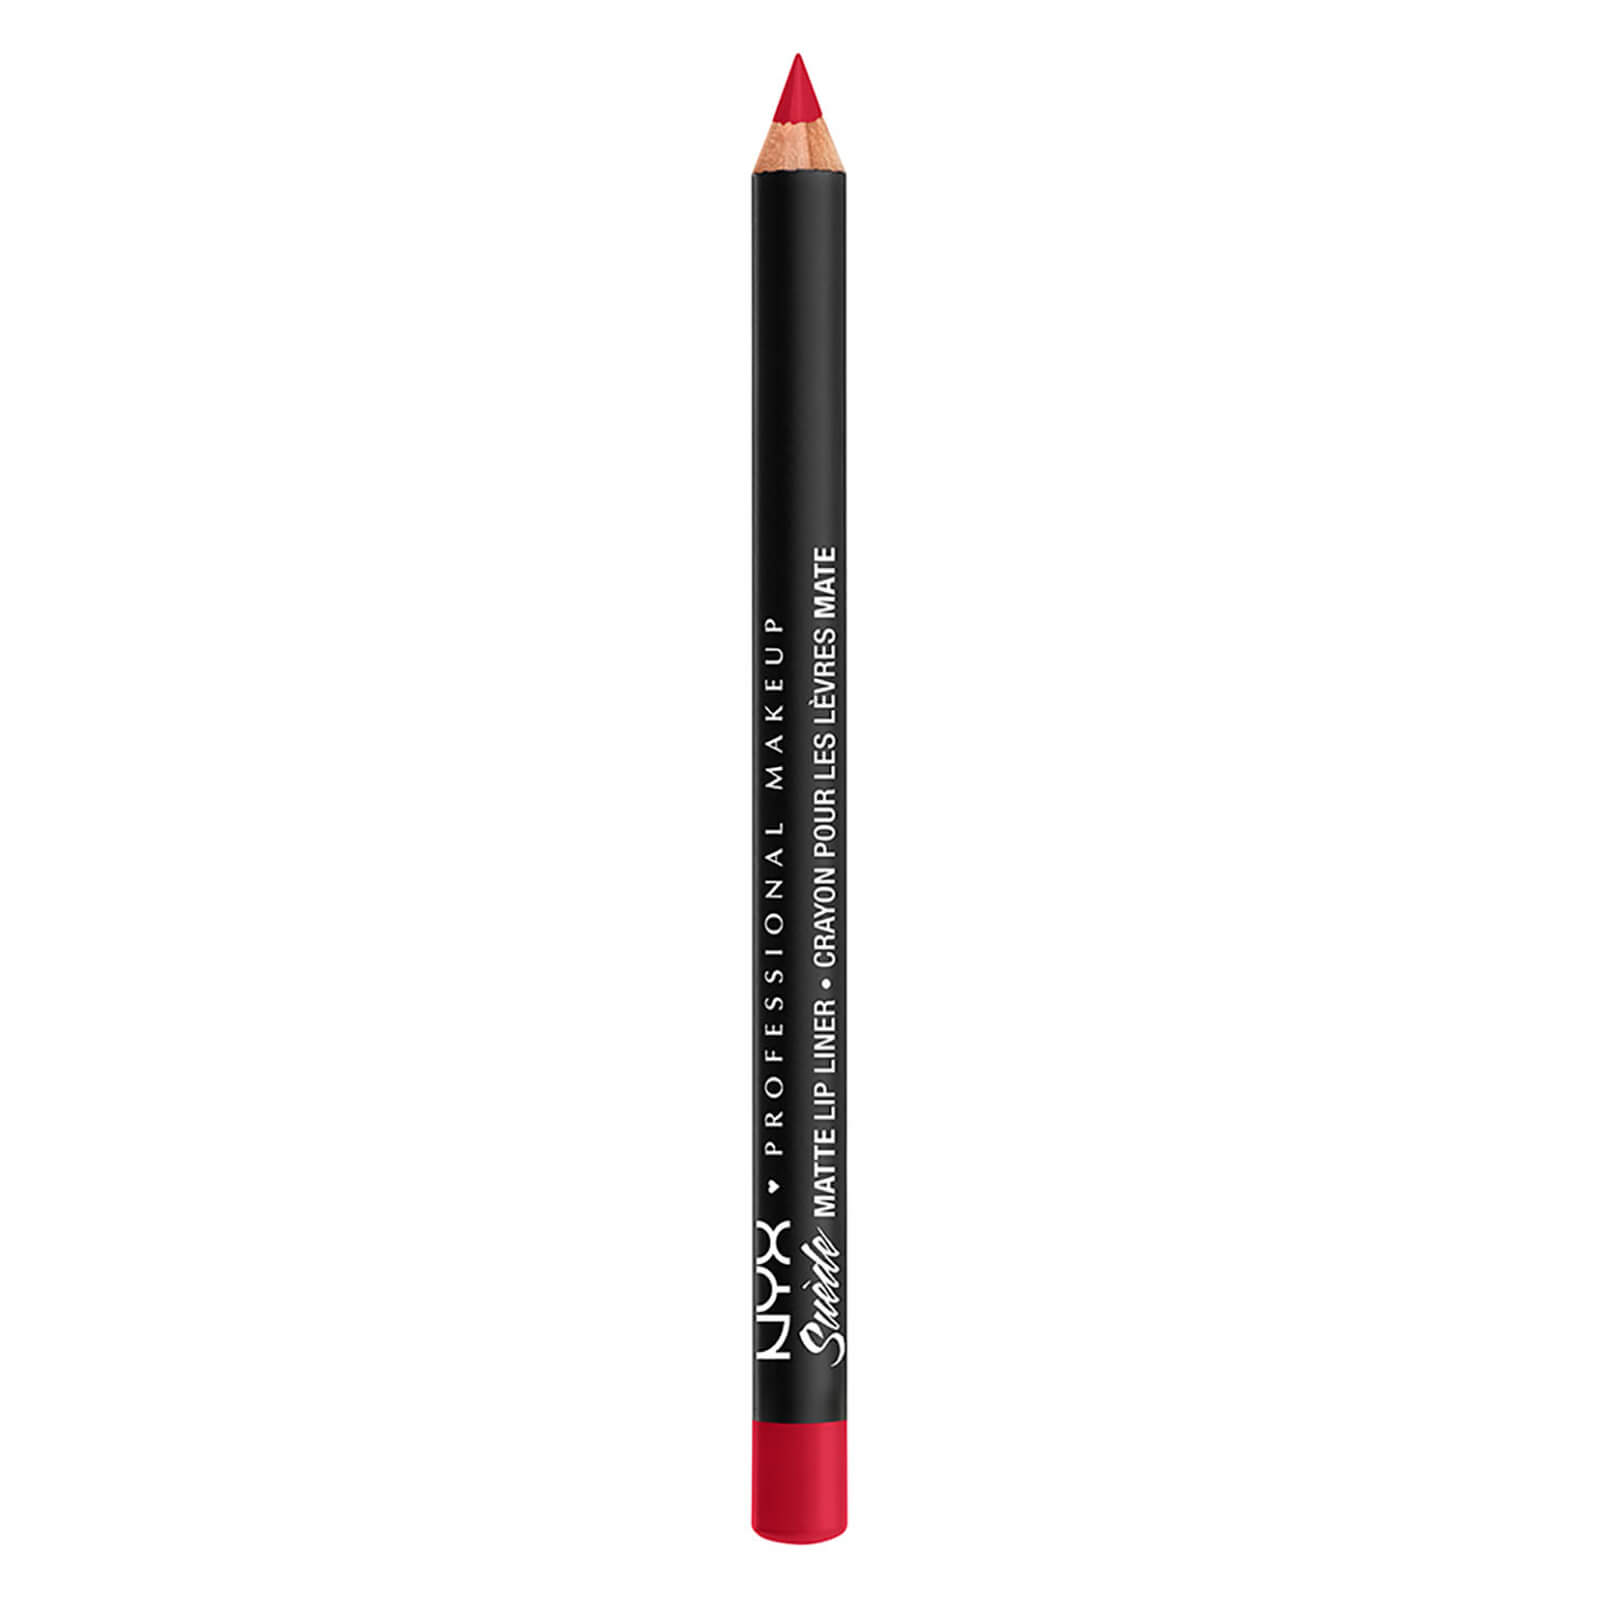 NYX Professional Makeup Suede Matte Lip Liner 1g (Various Shades) - Spicy - True Red